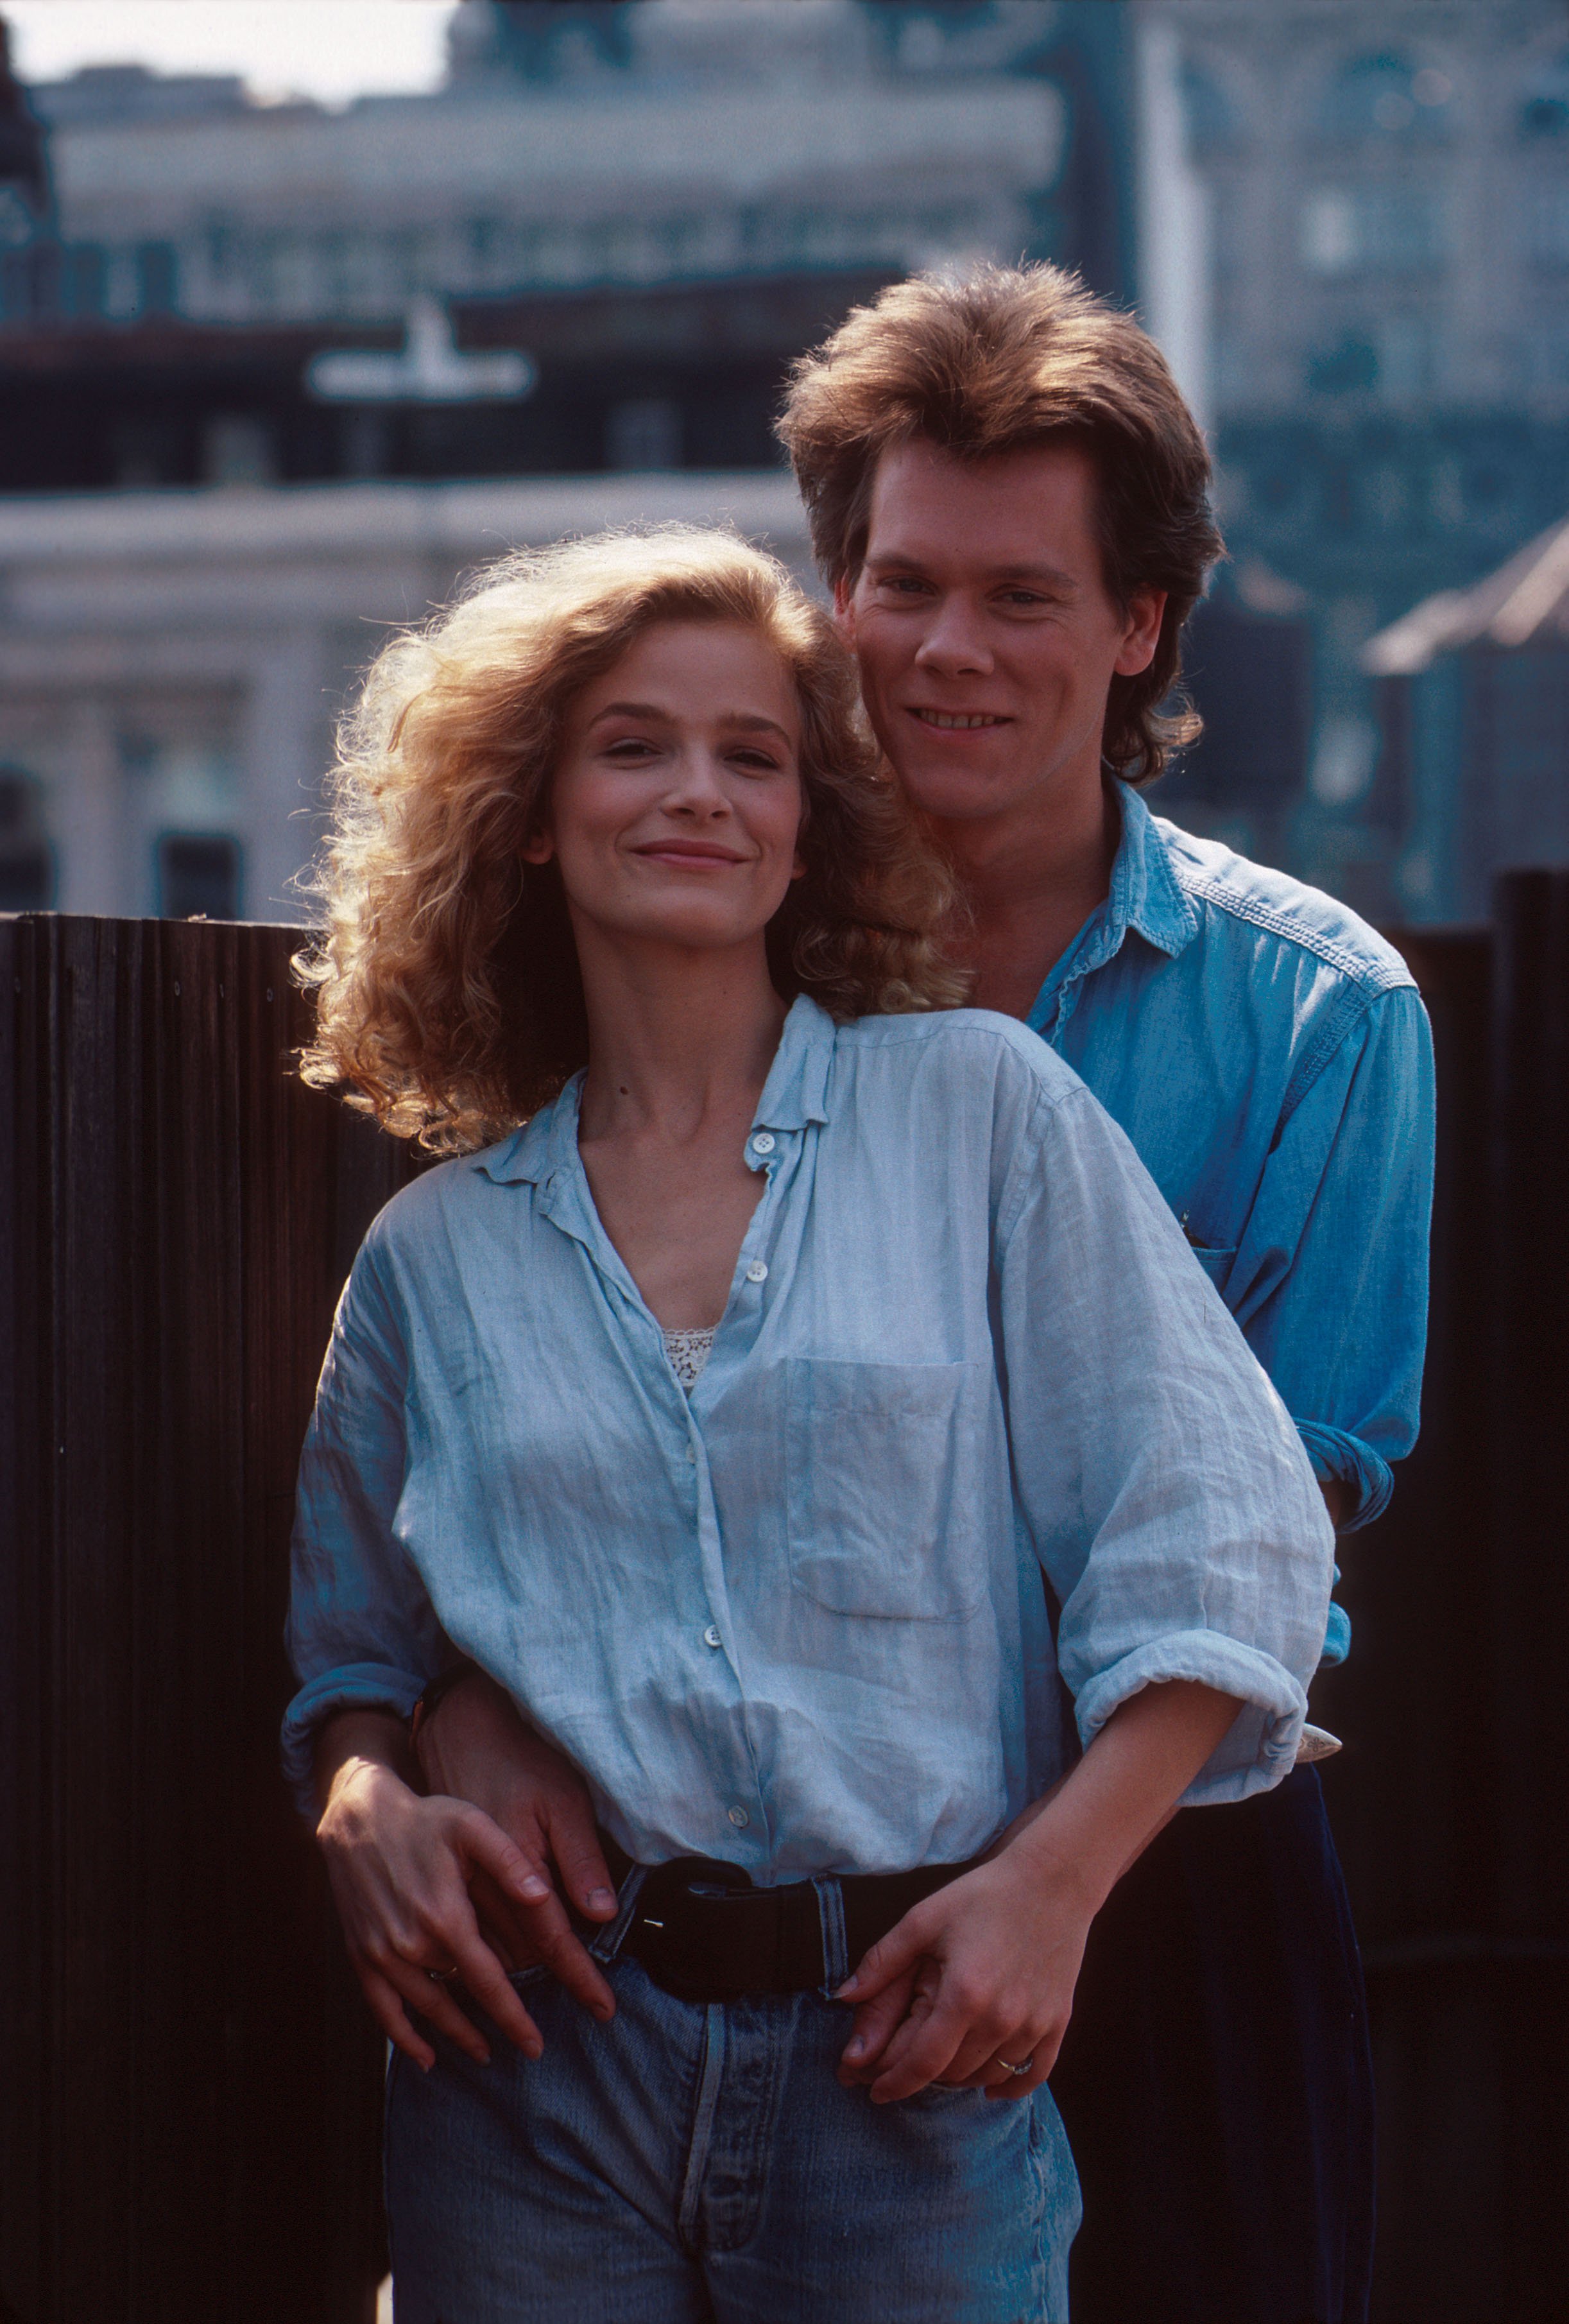 Kevin Bacon with Kyra Sedgwick on photo shoot in New York in August 1988. | Source: Getty Images